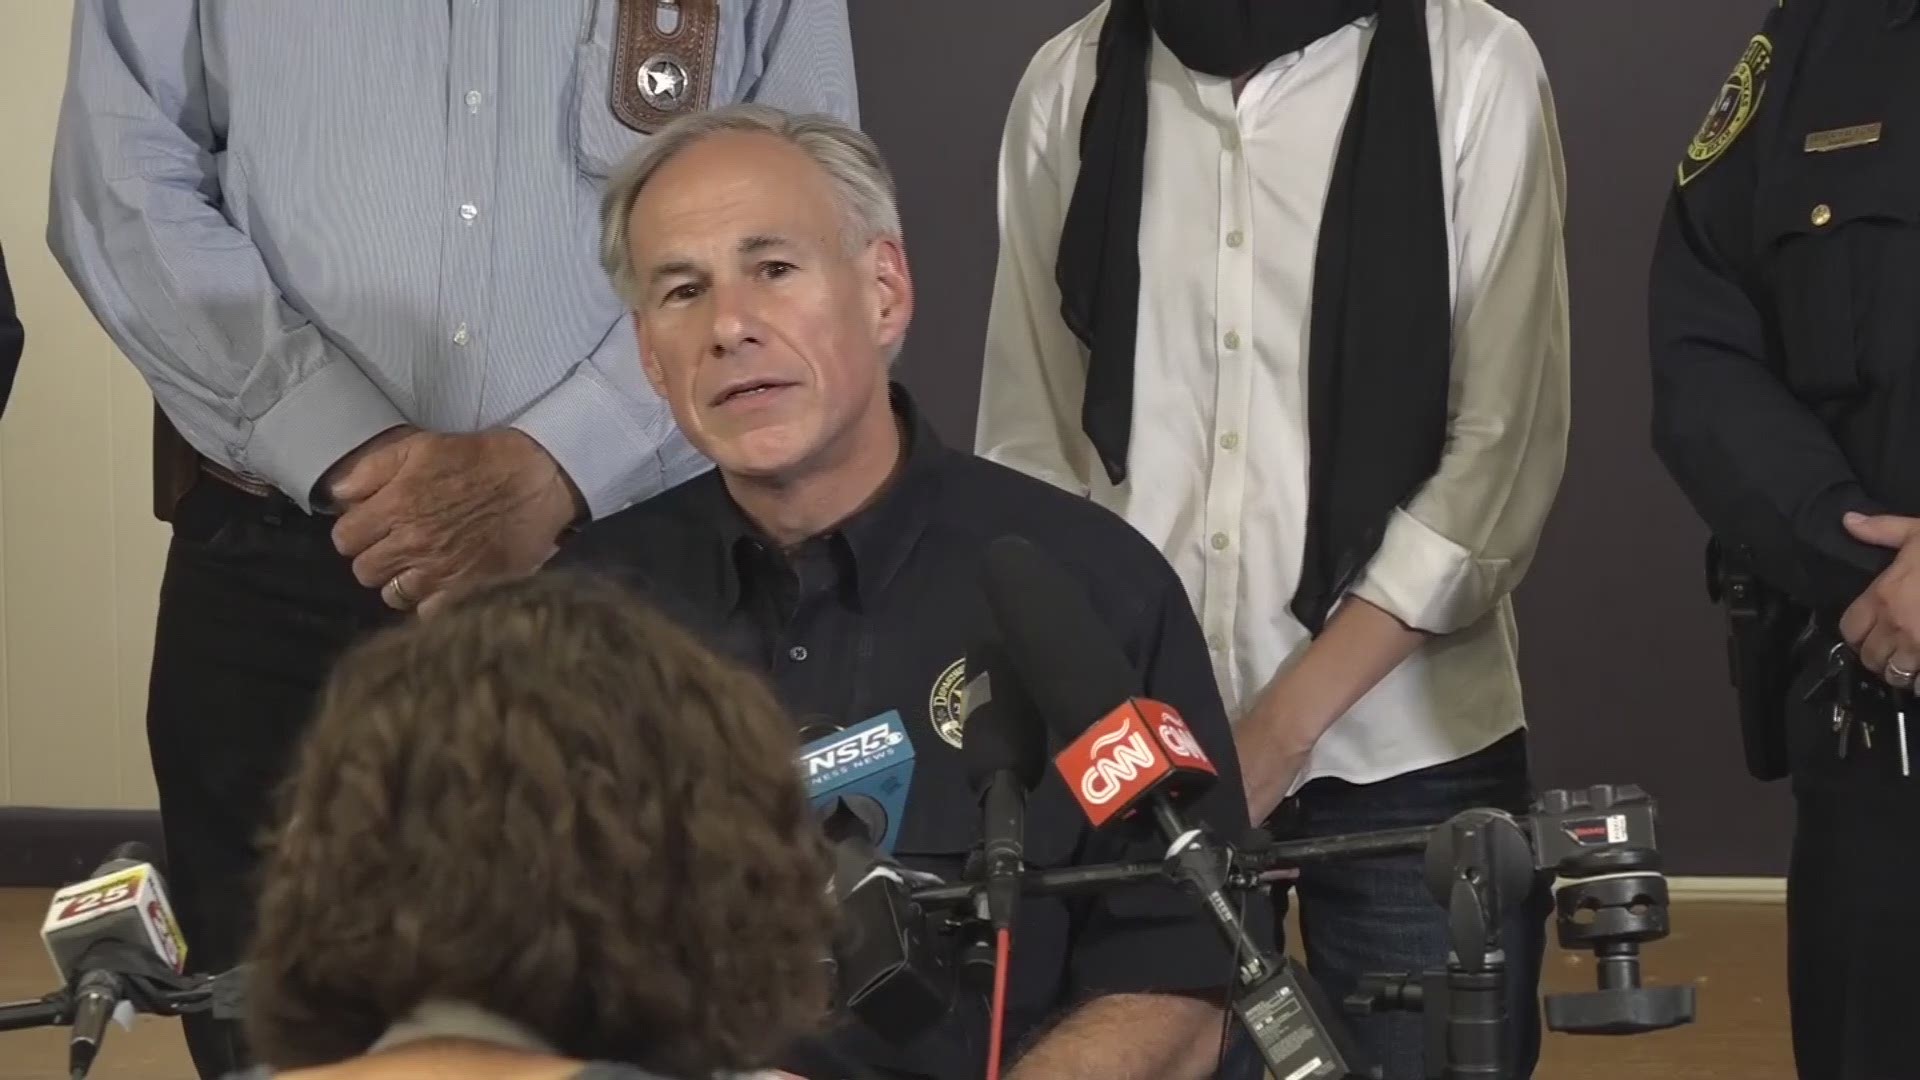 The full press conference in which Gov. Greg Abbott and Wilson County officials provide updates on the church shooting that happened in Sutherland Springs.